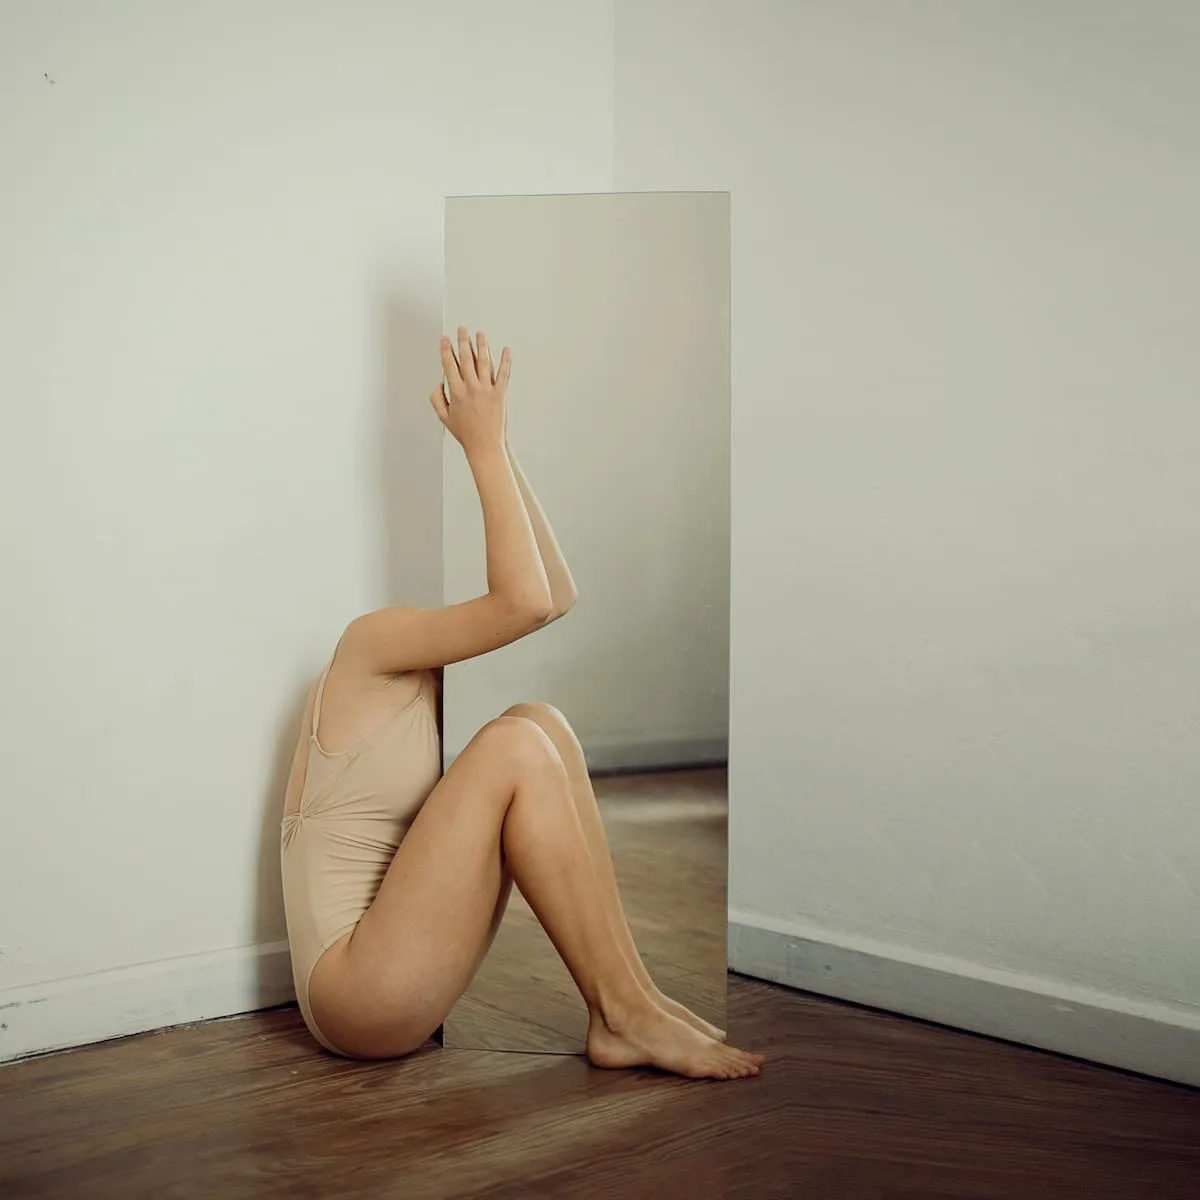 woman sitting in nude body suit with a face hiding against the mirror and reflection of one hand and leg seen in mirror